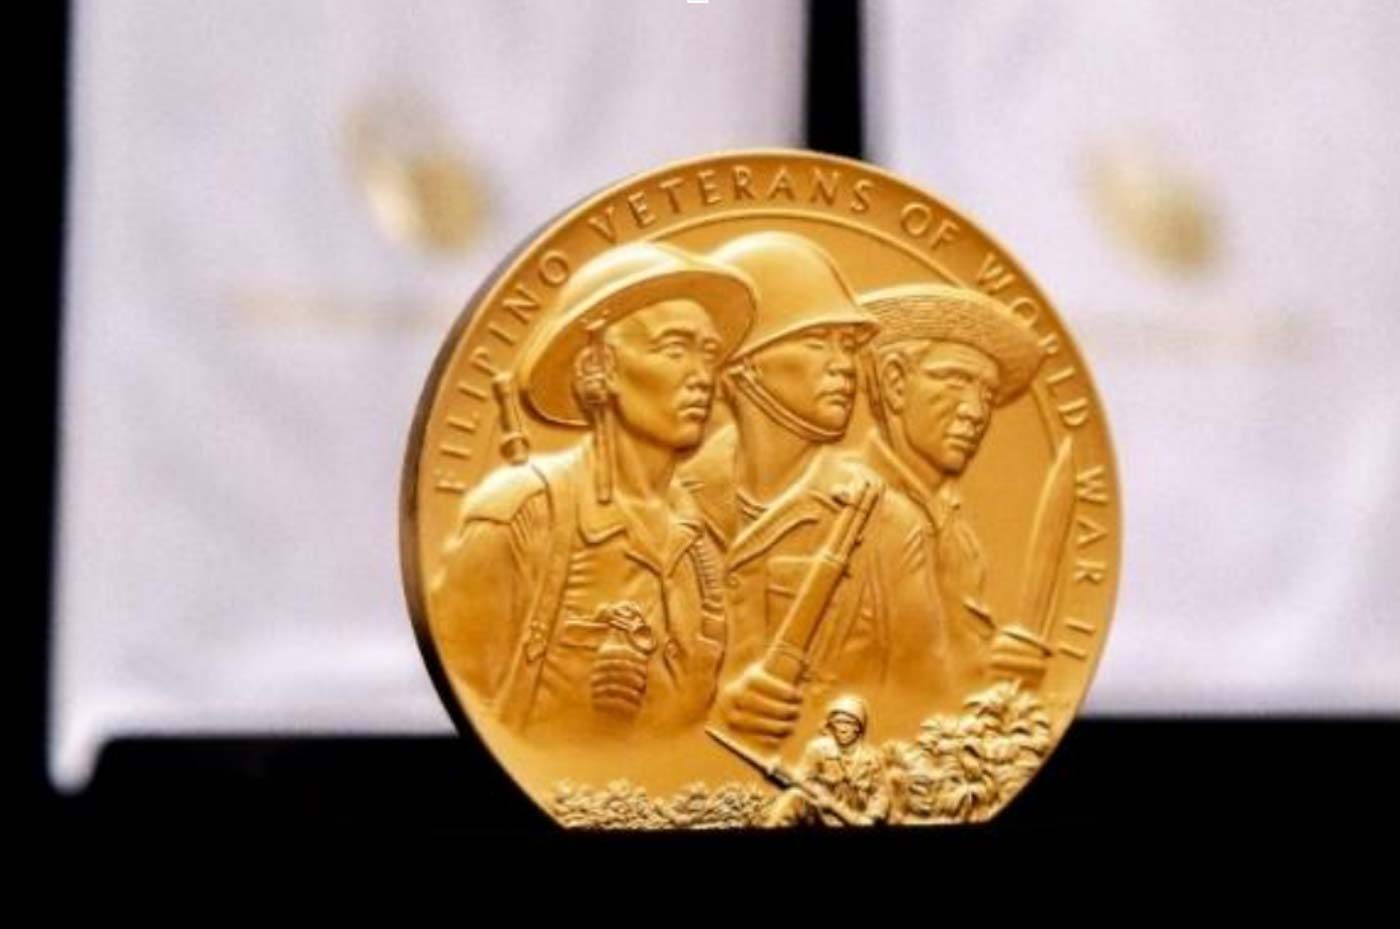 REPLICA. A bronze replica of the Filipino World War II Veterans Congressional Gold Medal is displayed during a ceremony at the U.S. embassy in the Philippines on September 13, 2018. Photo courtesy of United States embassy in Manila 